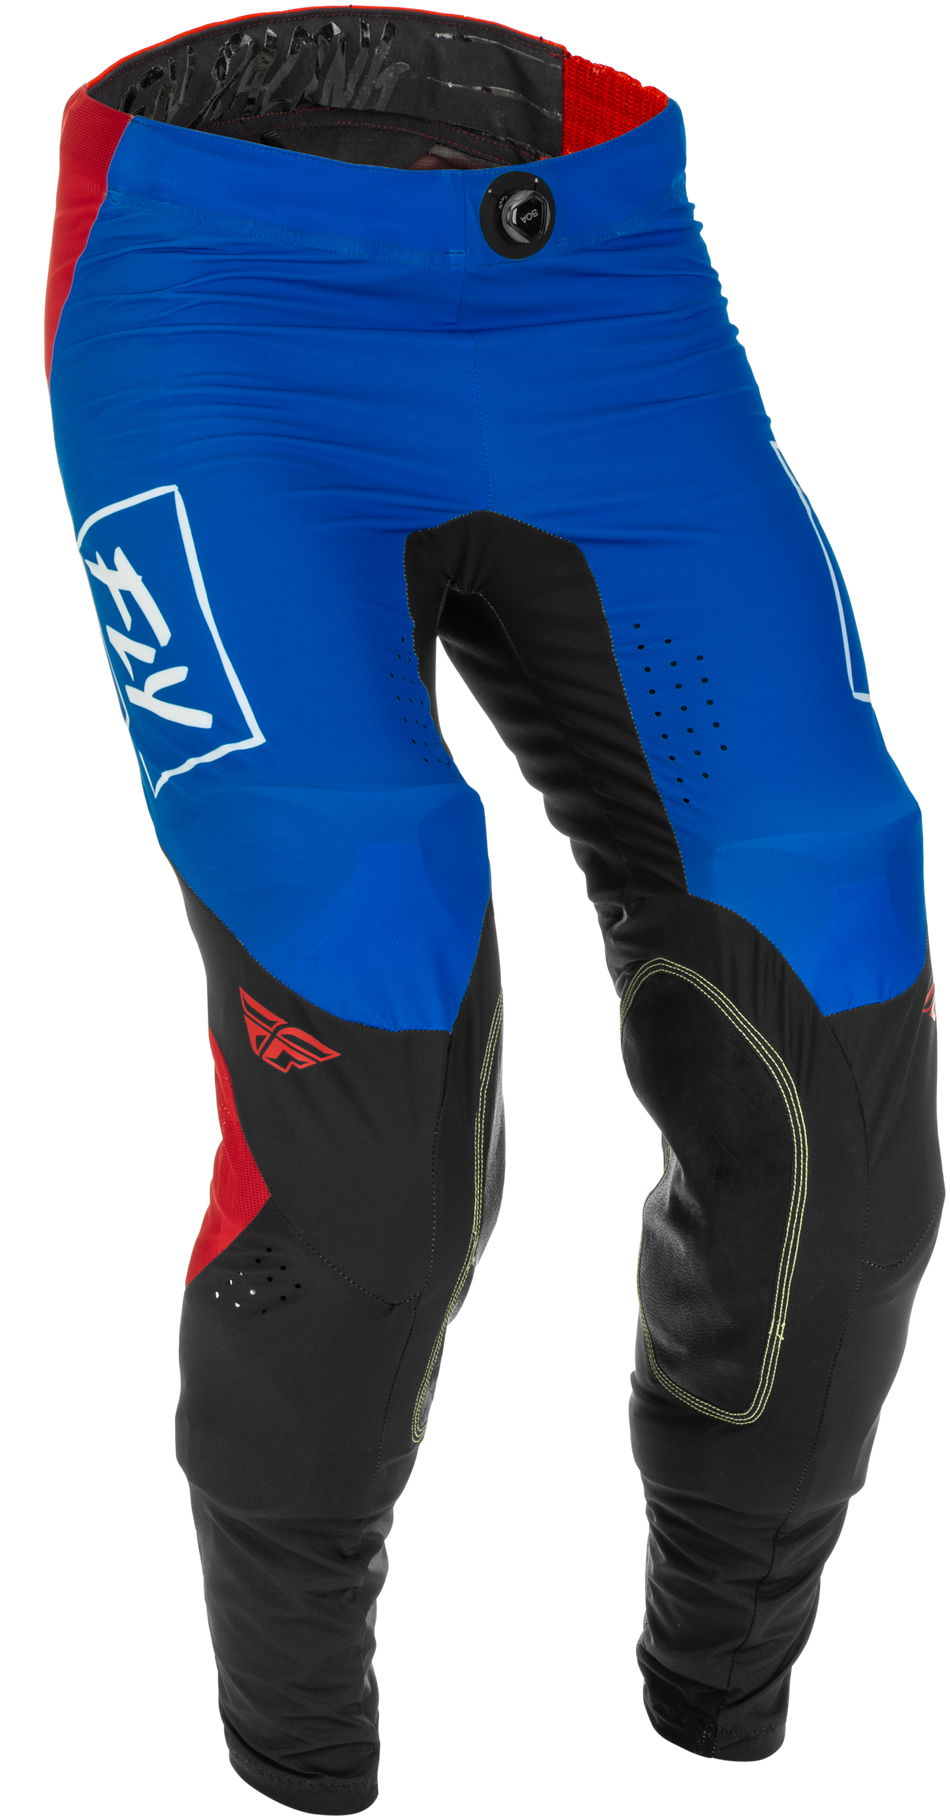 FLY RACING Lite Pants Red/White/Blue Size 38 375-73338